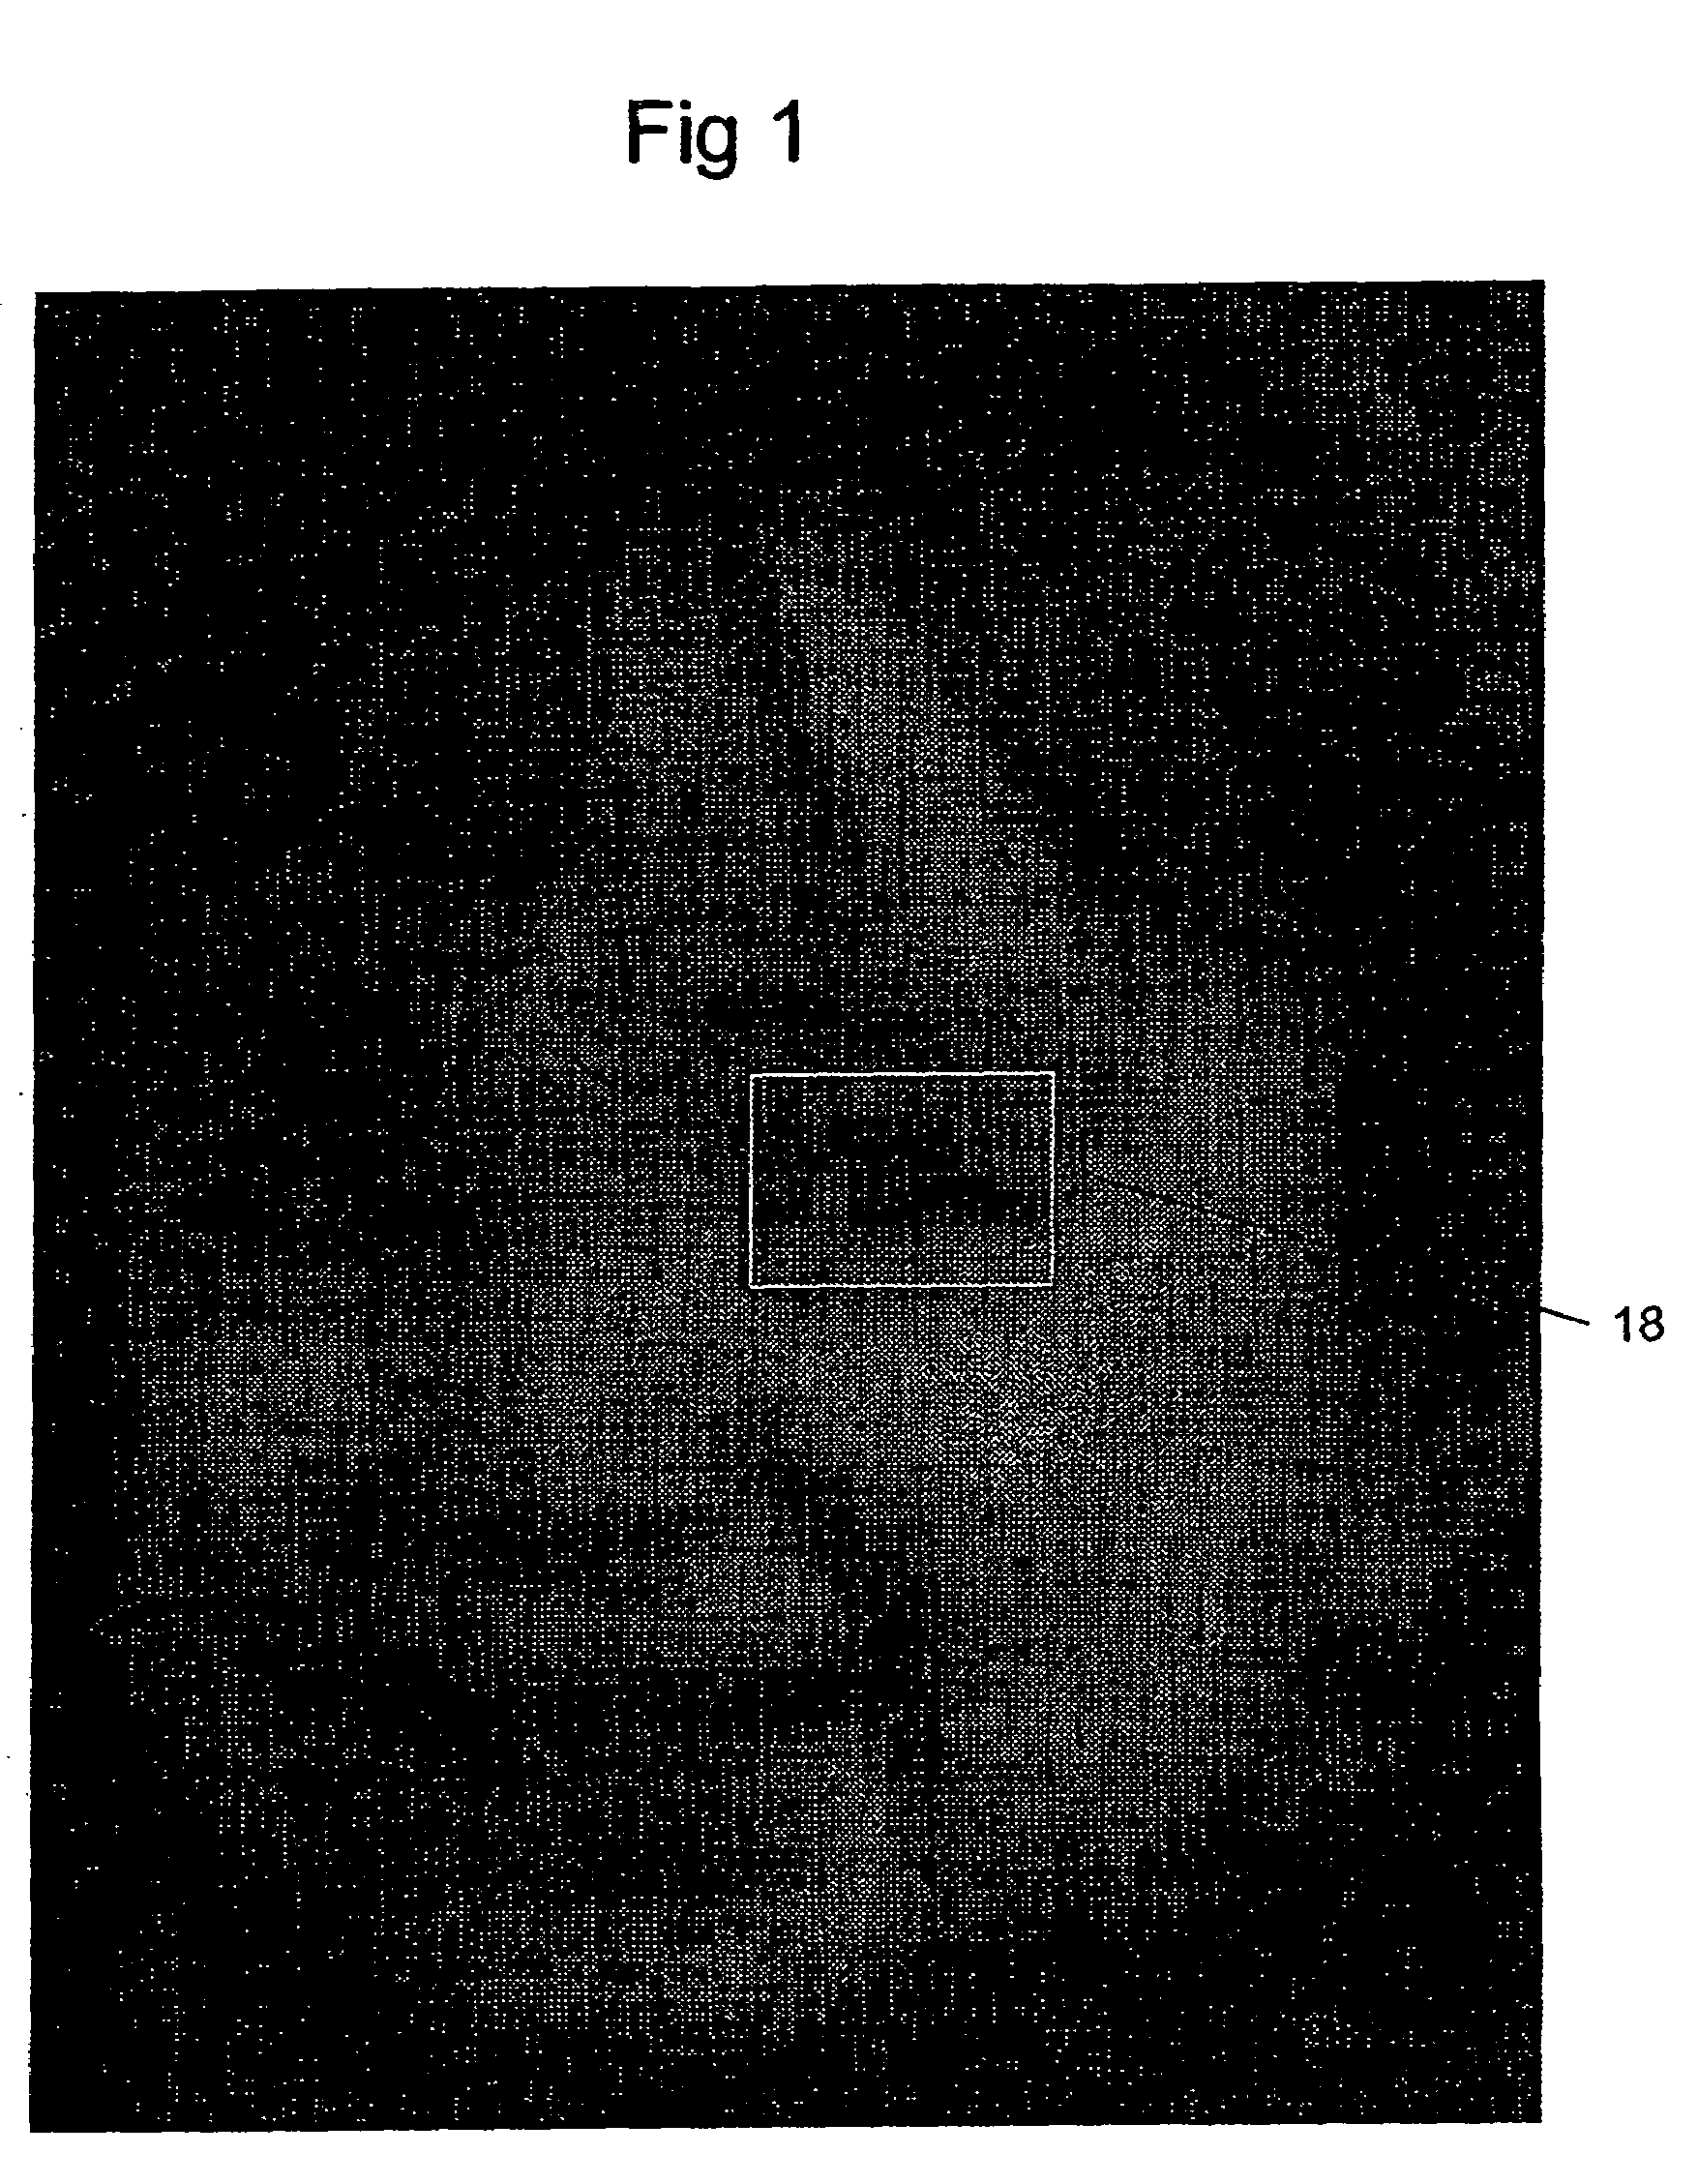 Method of generating painted or tile mosaic reproduction of a photograph or graphic image